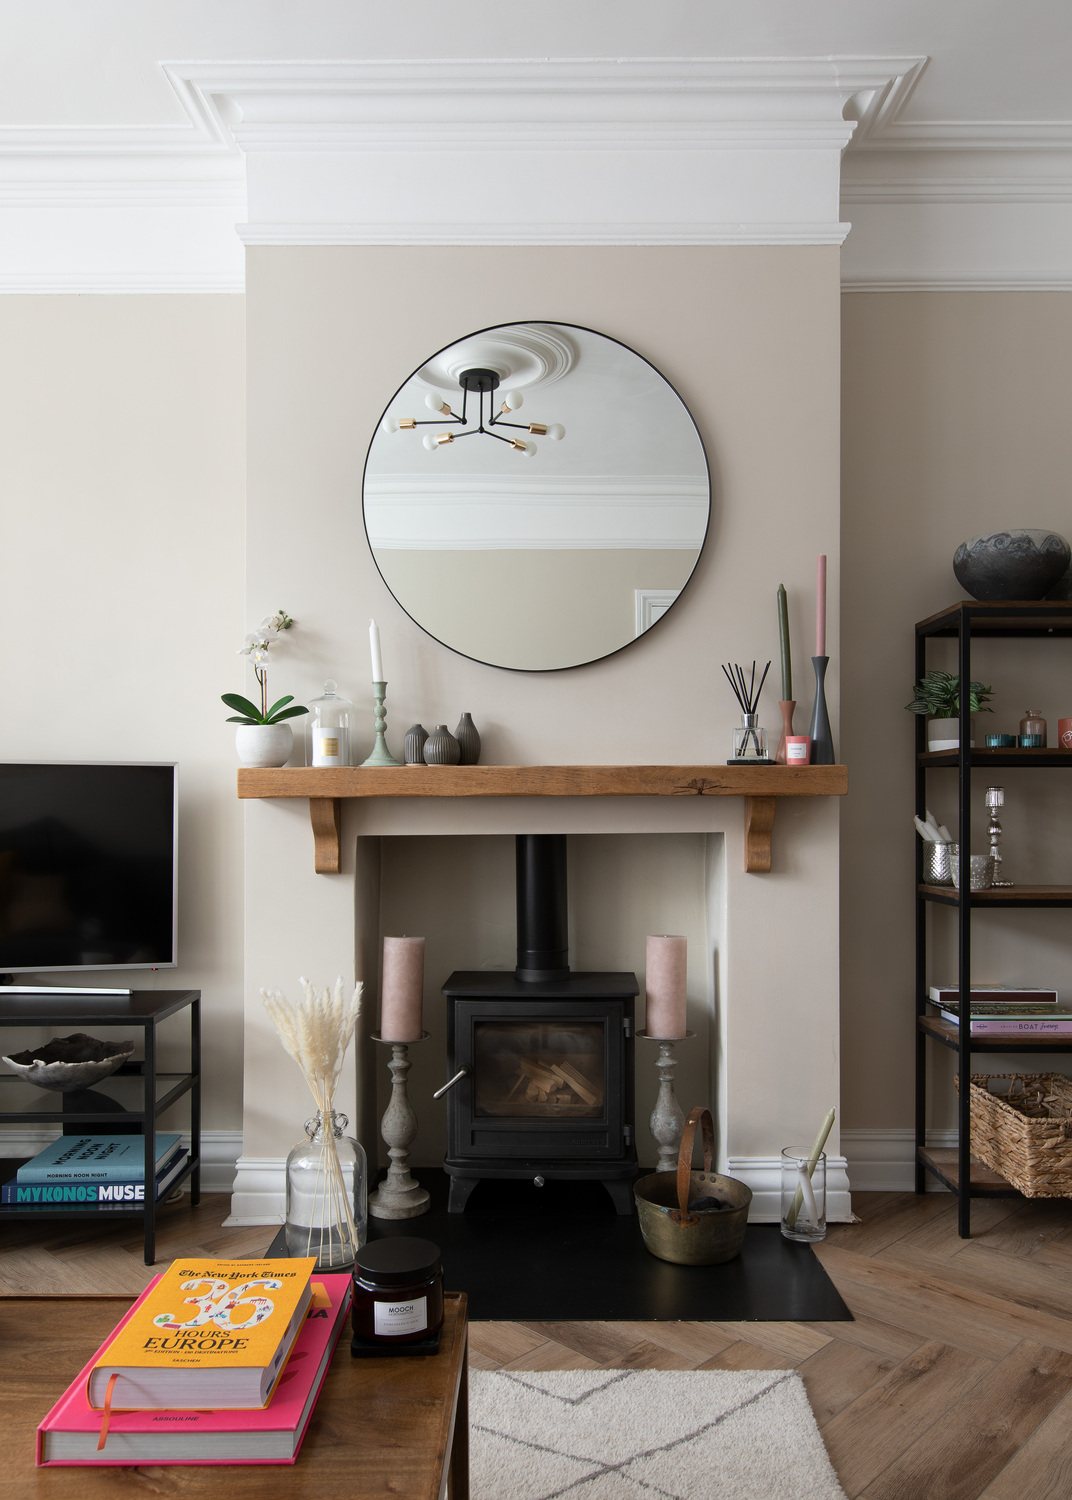 Subtle finishing touches complete the calm aesthetic of this Croydon abode